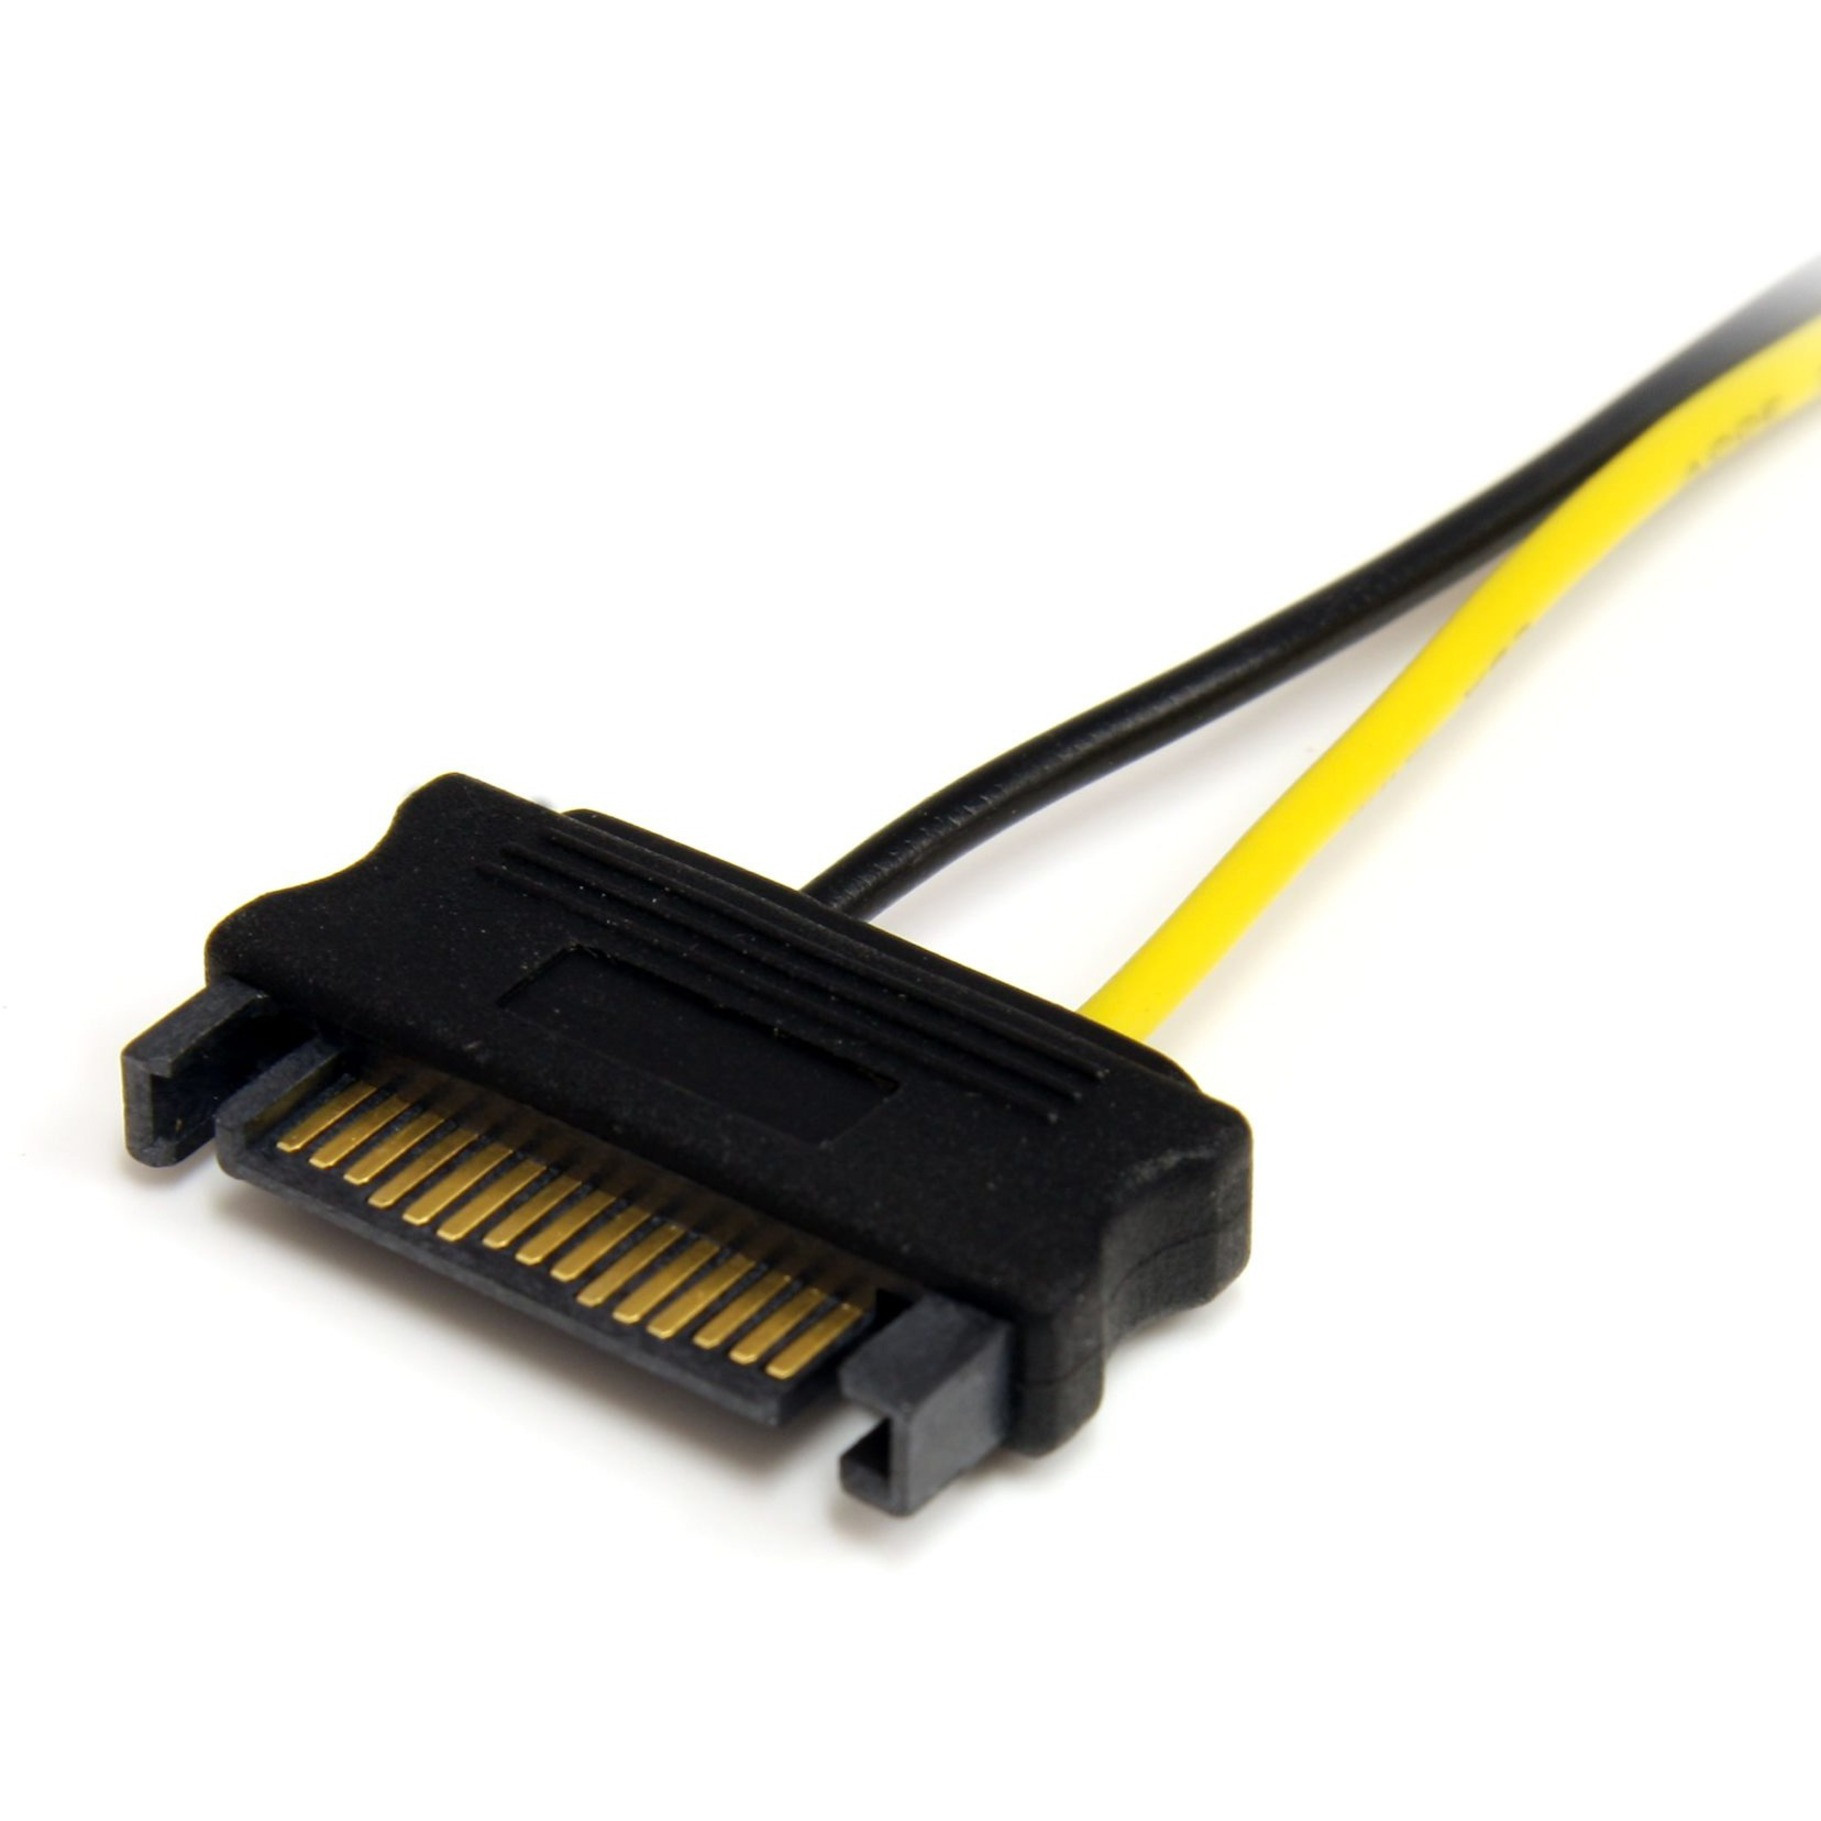 Startech .com 6in SATA Power to 8 Pin PCI Express Video Card Power Cable AdapterConvert two 15-pin SATA power to an 8-p... SATPCIEX8ADP - Corporate Armor